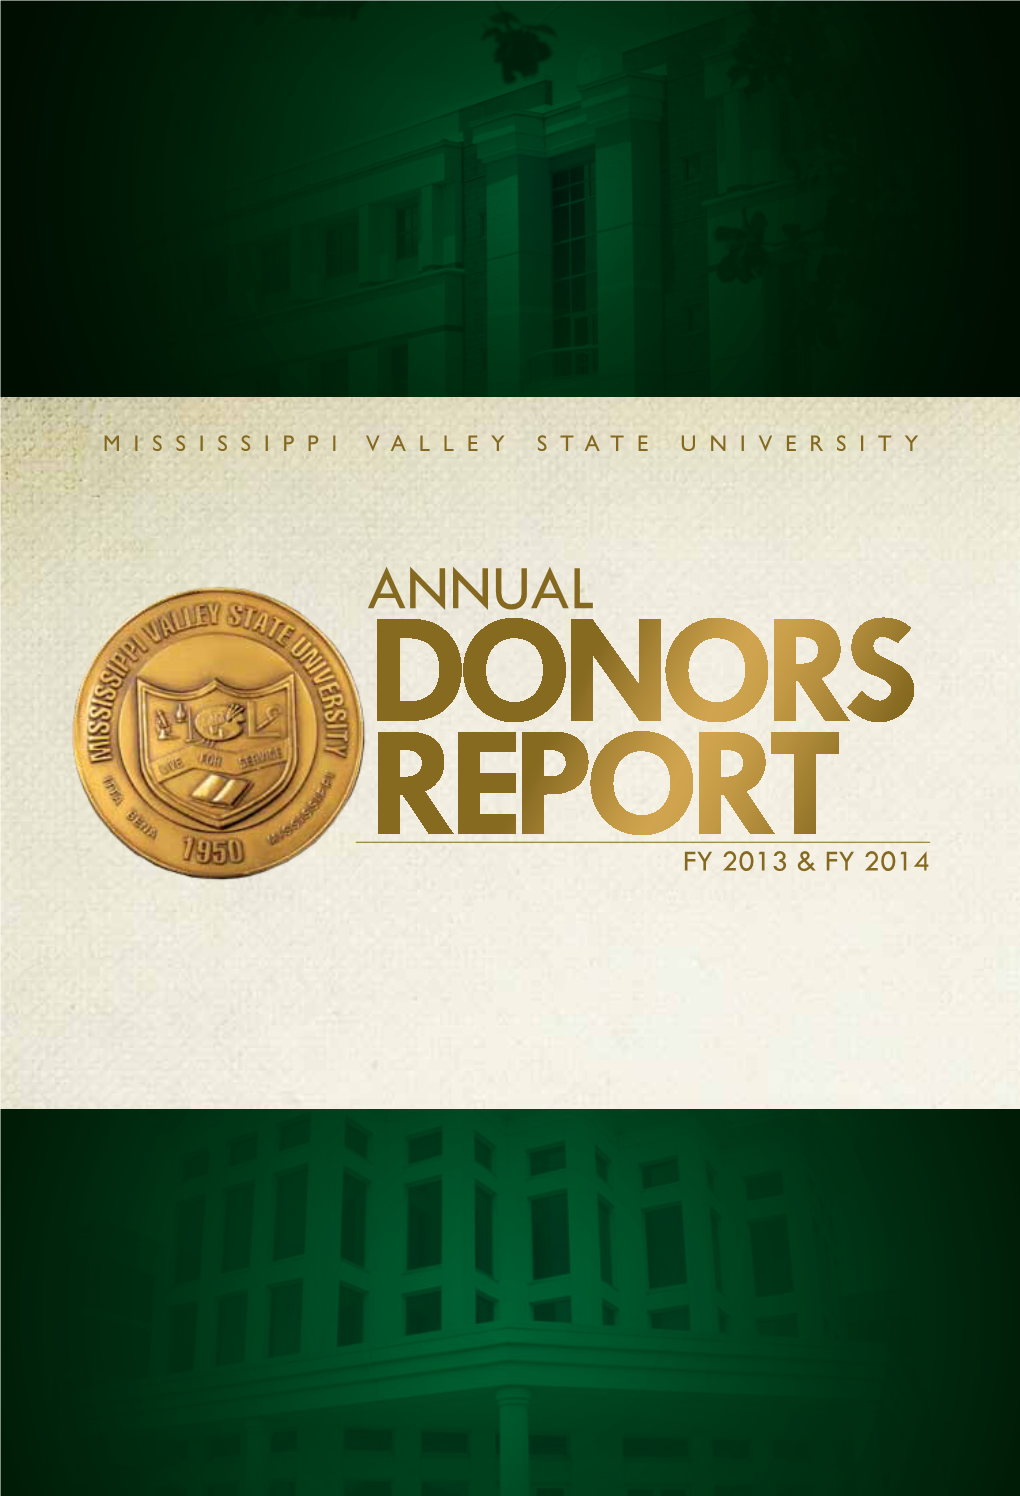 Annual Donors Report FY 2013 & FY 2014